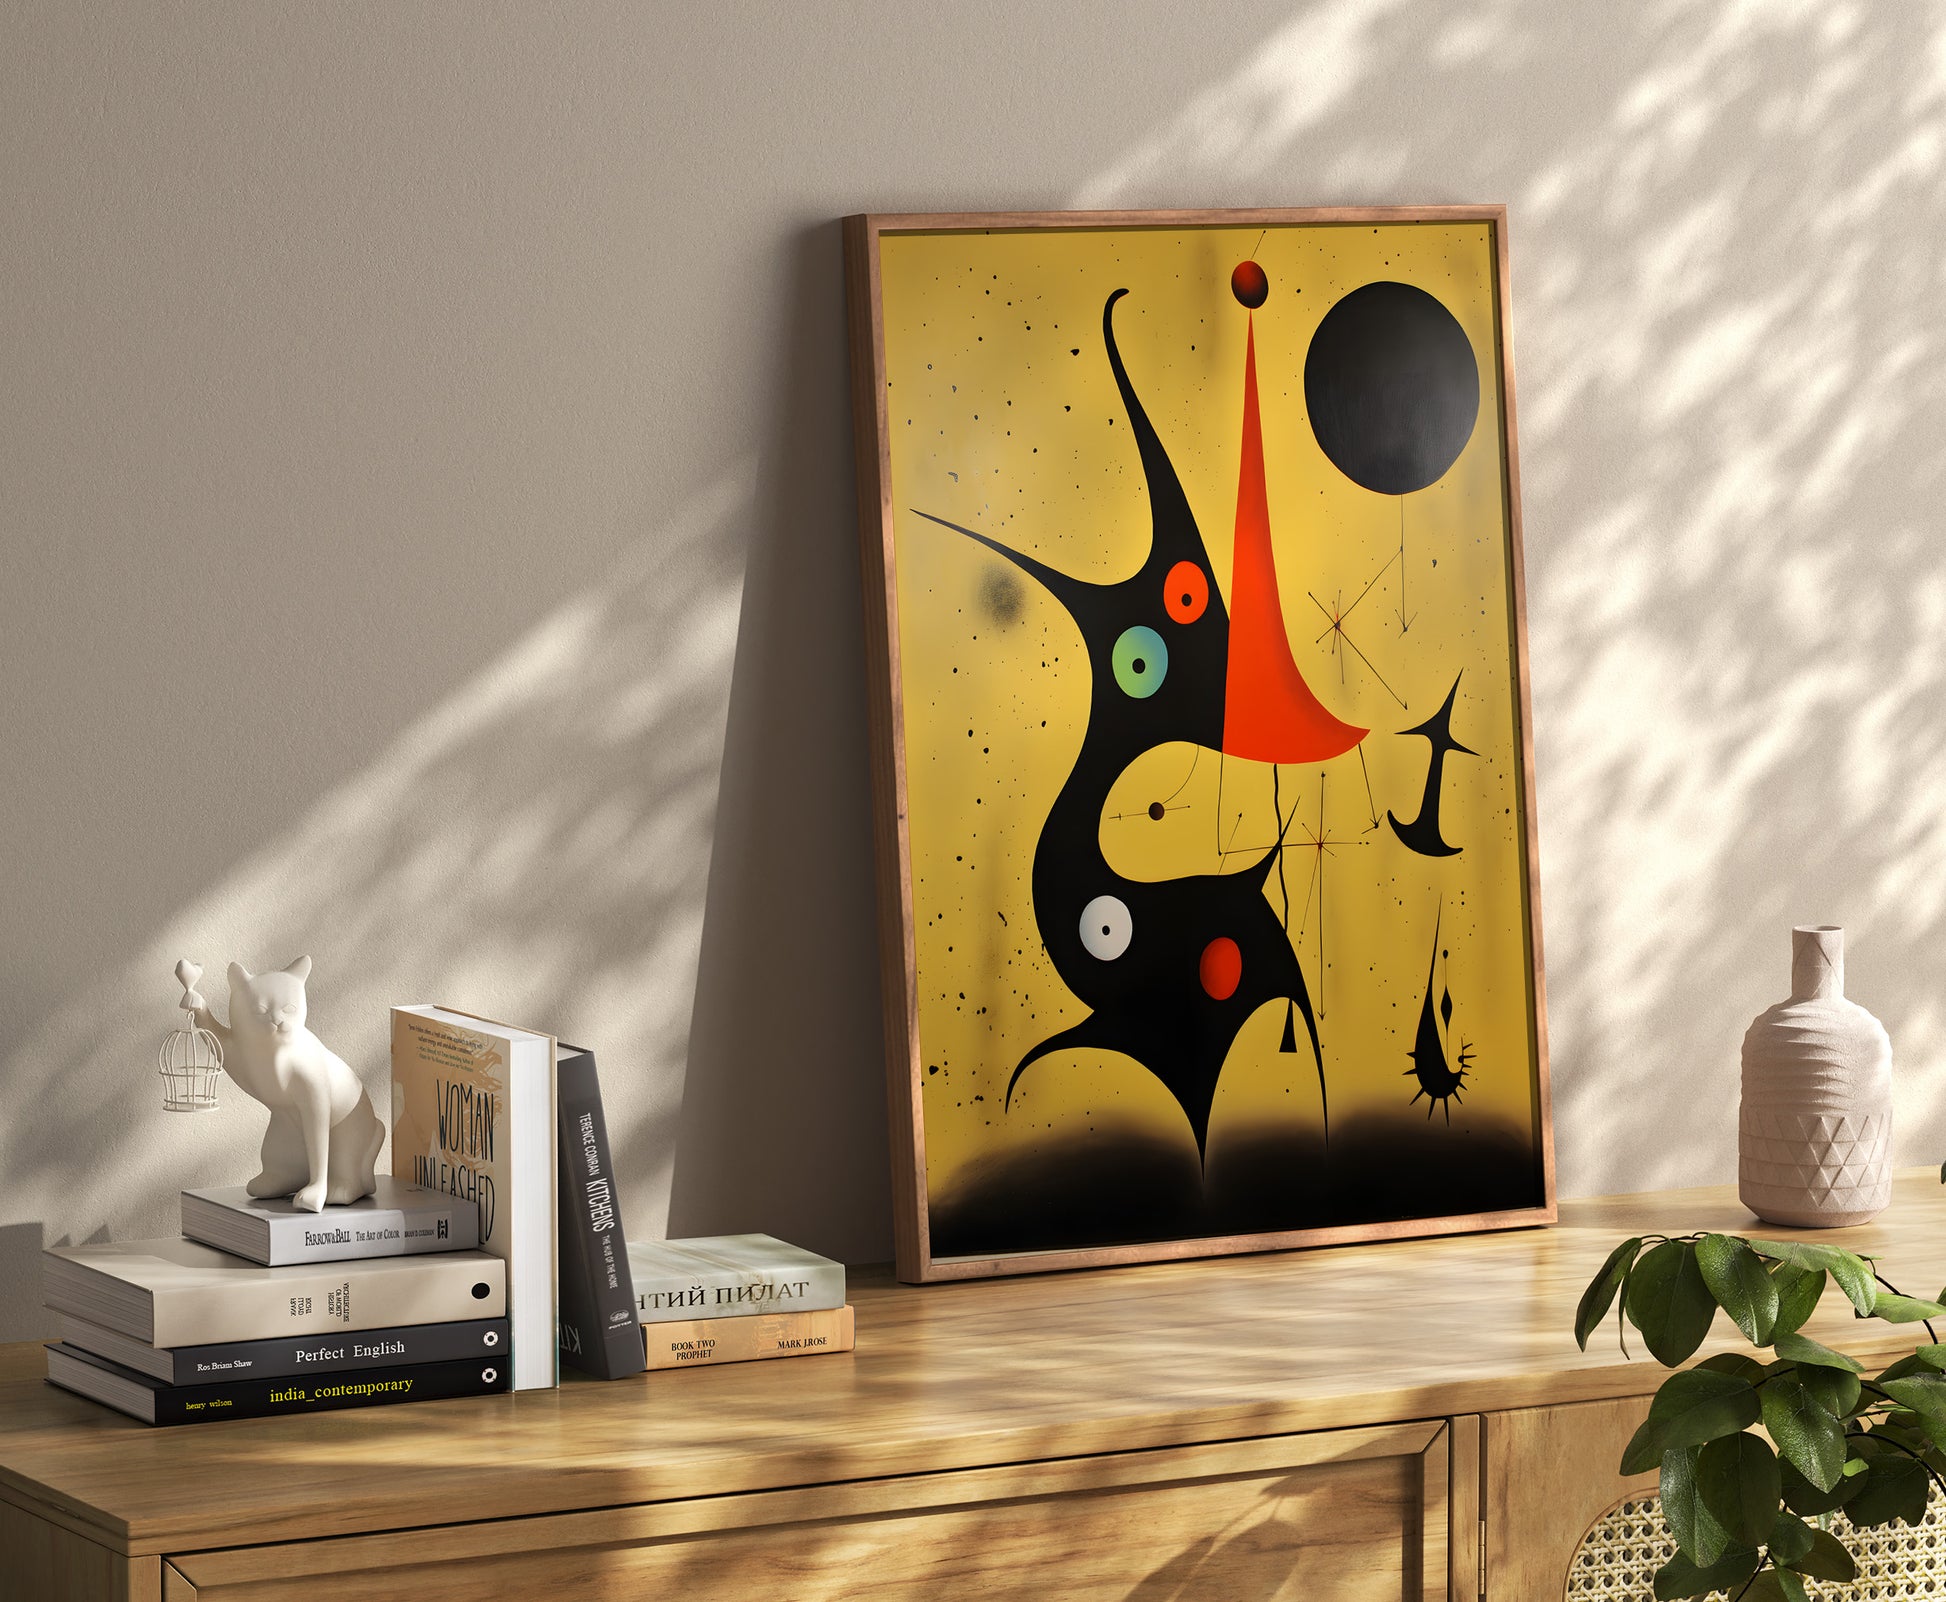 Modern abstract art on canvas in a stylish room with decorative items and books on a shelf.